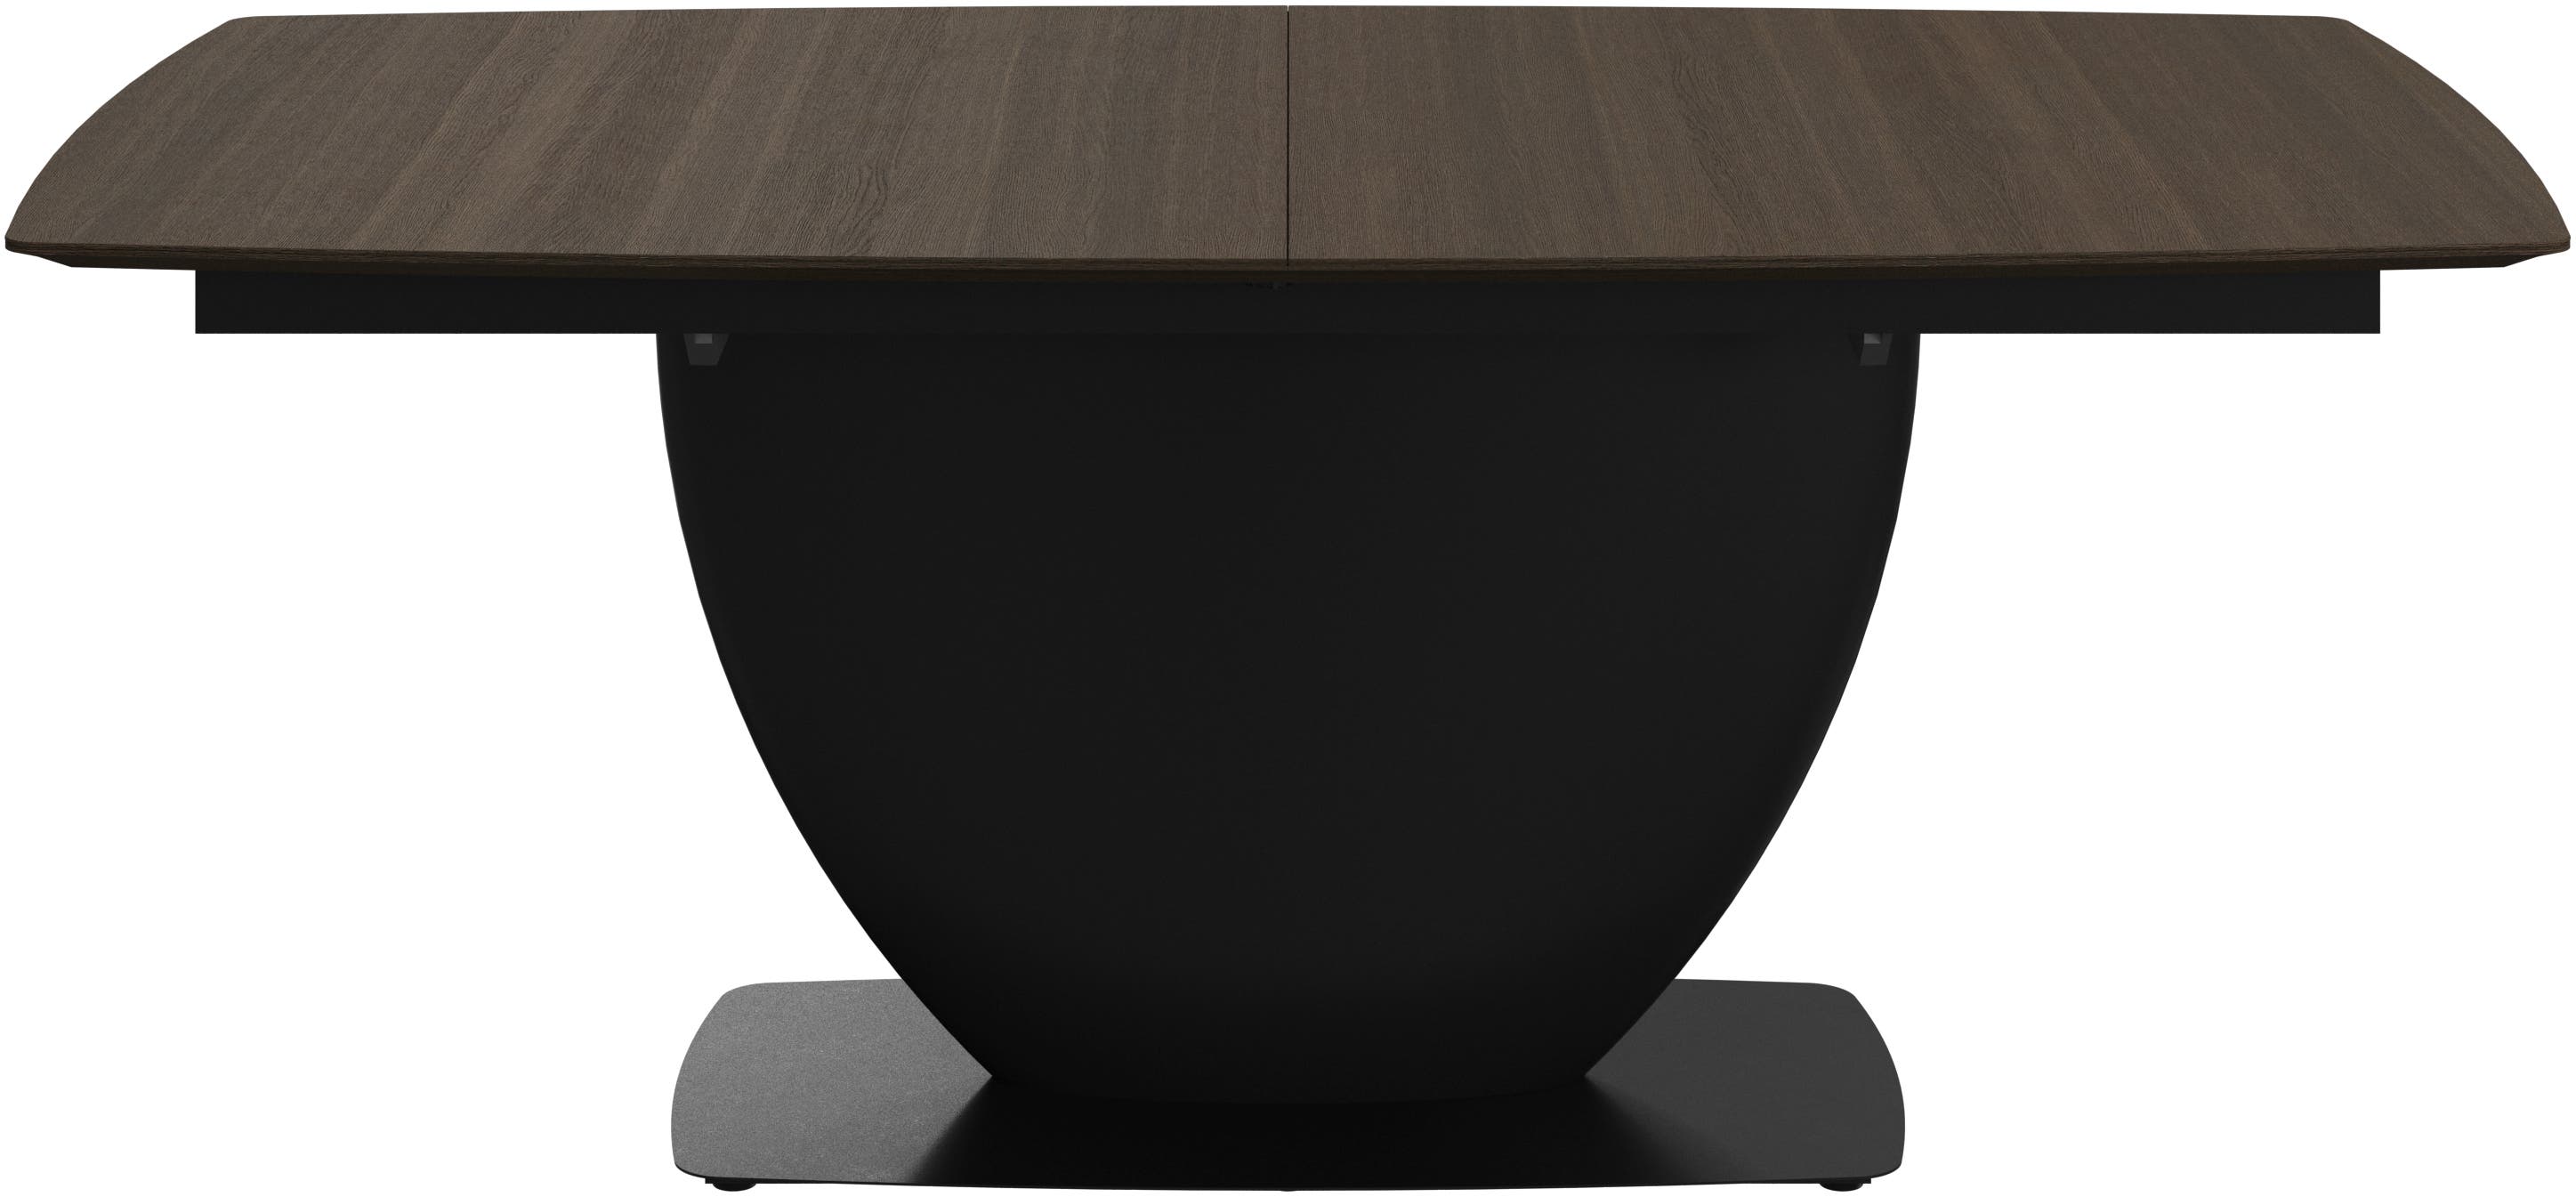 Fiorentina extendable dining table